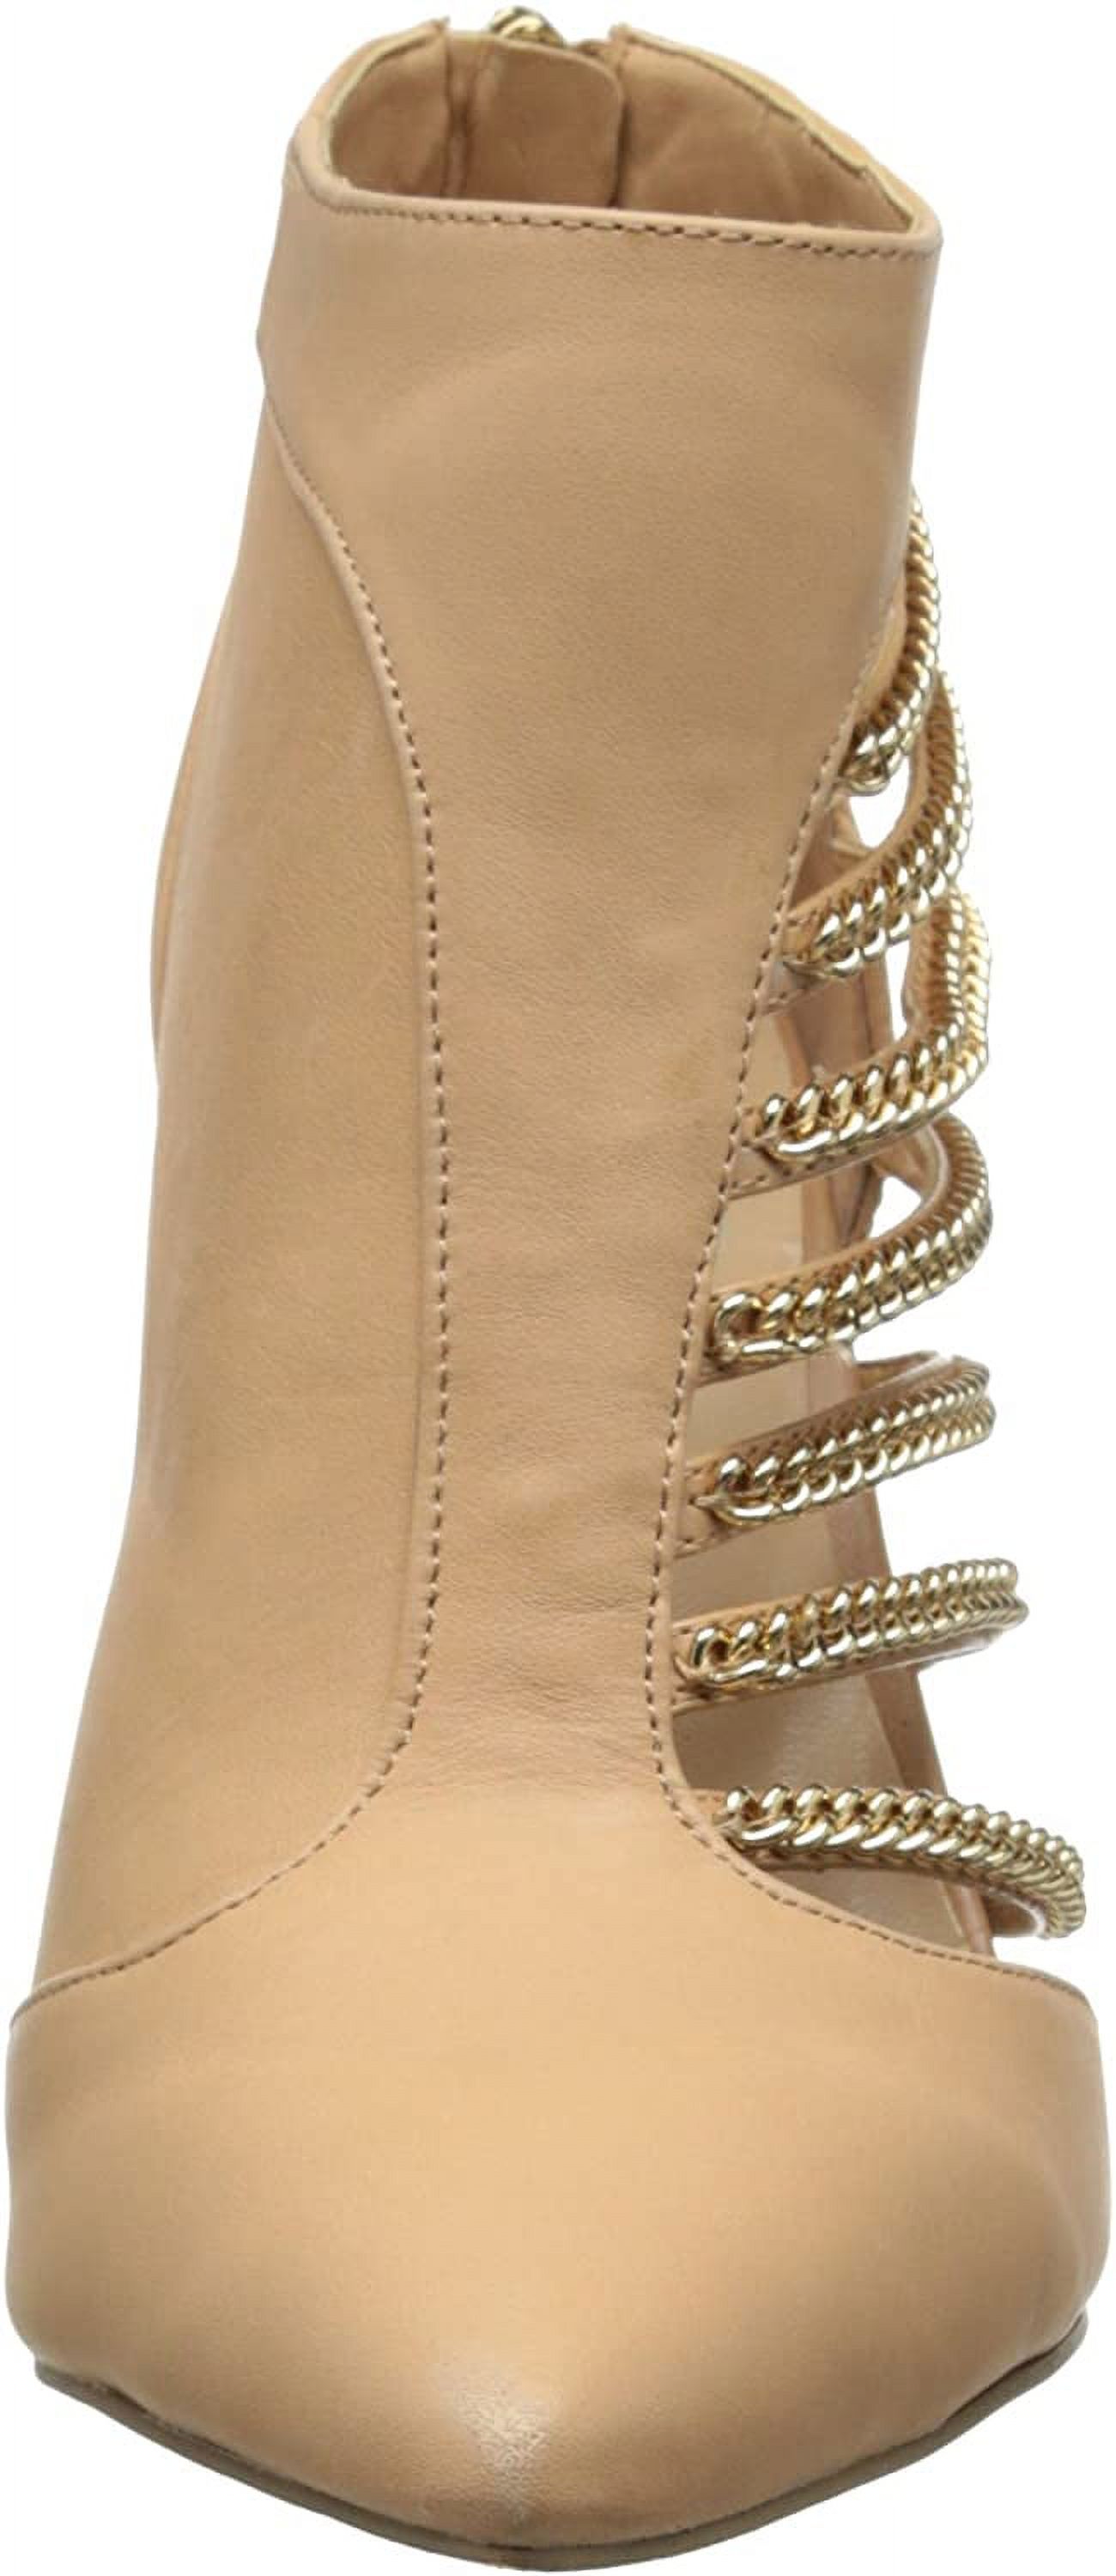 Jessica Simpson Women's Camelia High Heel Chain Cut Out Booties, Beach Sand - image 2 of 8